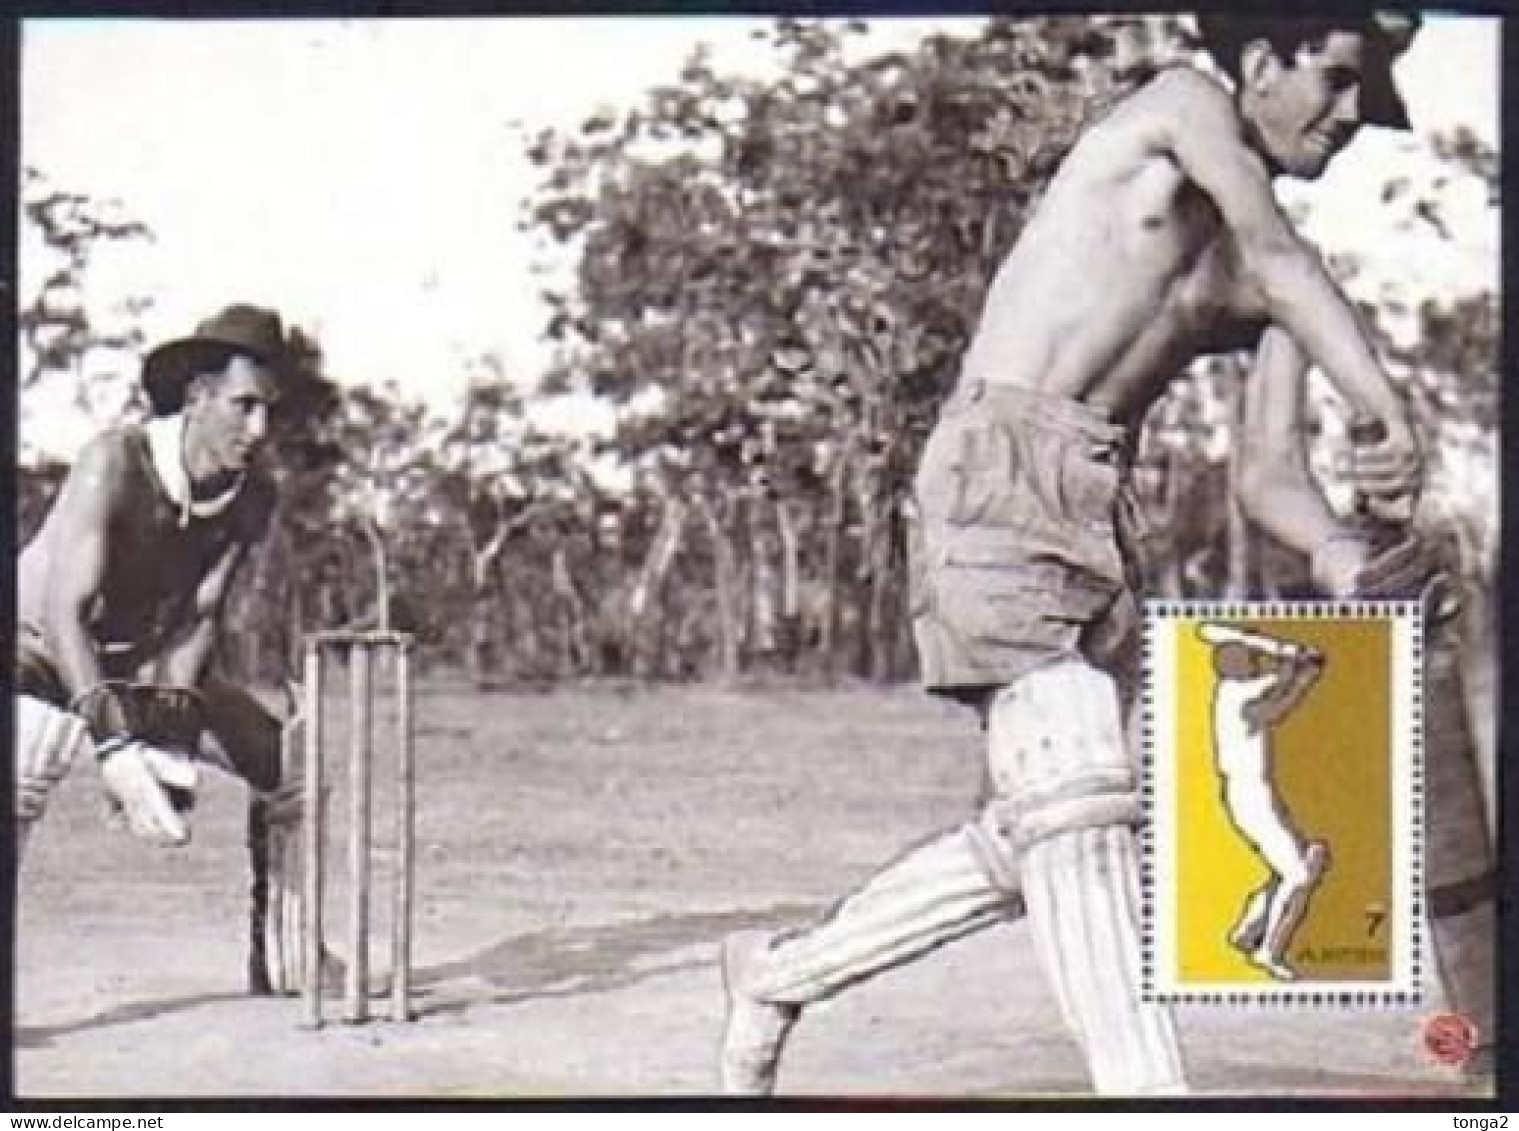 AUSTRALIA 2008 PRESTIGE BOOKLET HISTORY OF CRICKET - MINT NH - see 7 more pictures of the 7 panes